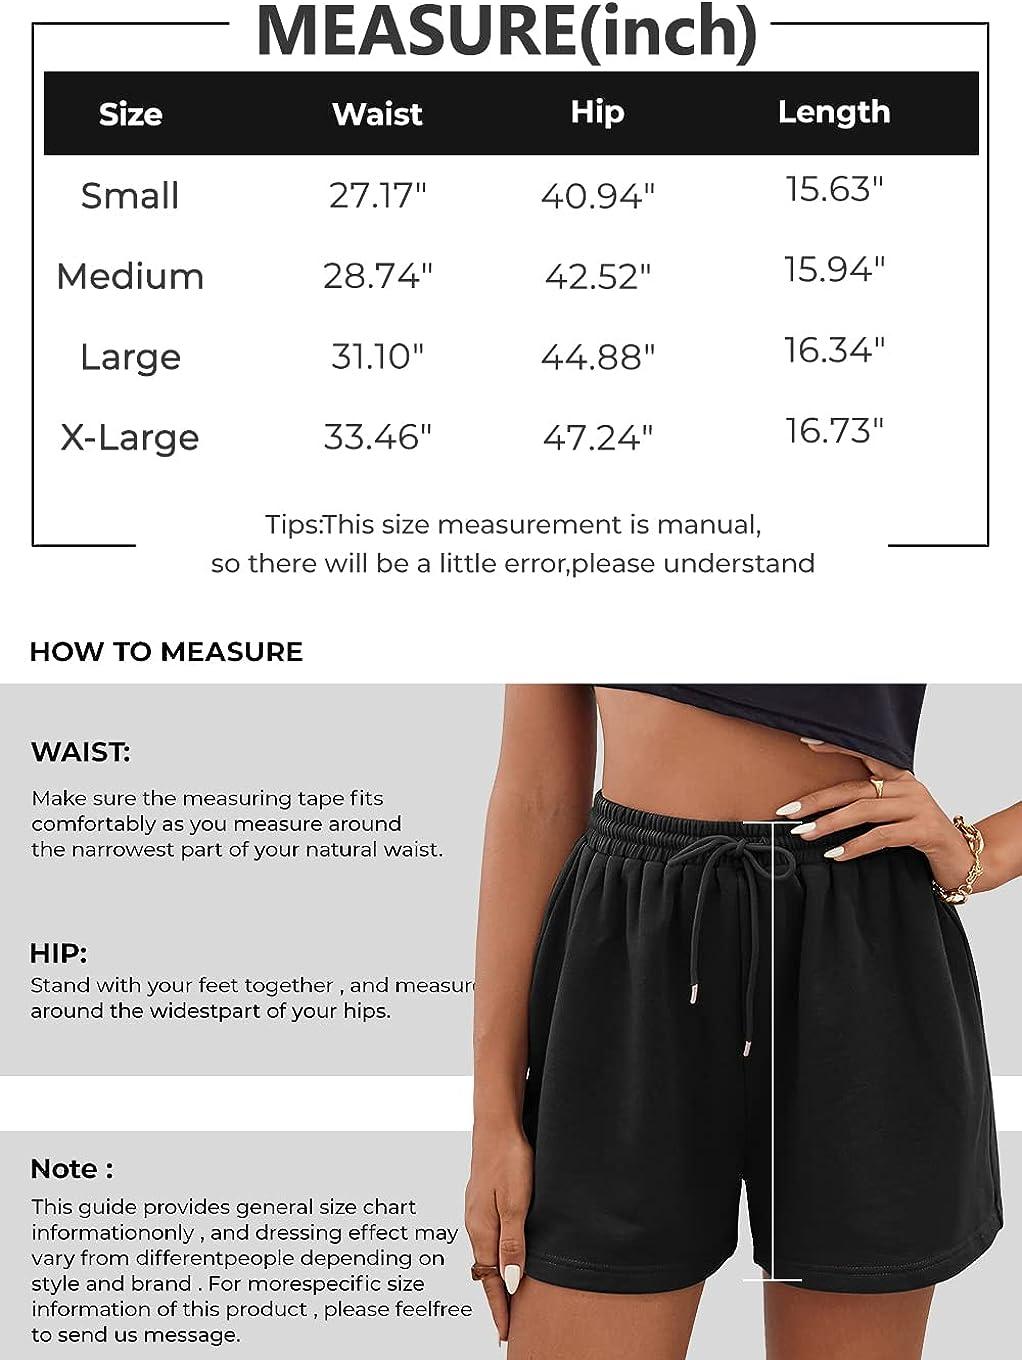 EFAN Running Sweat Shorts Women Summer Casual Comfy High Waisted Lounge  Shorts Drawstring Cotton Shorts with Pockets 2024 Trendy at  Women's  Clothing store